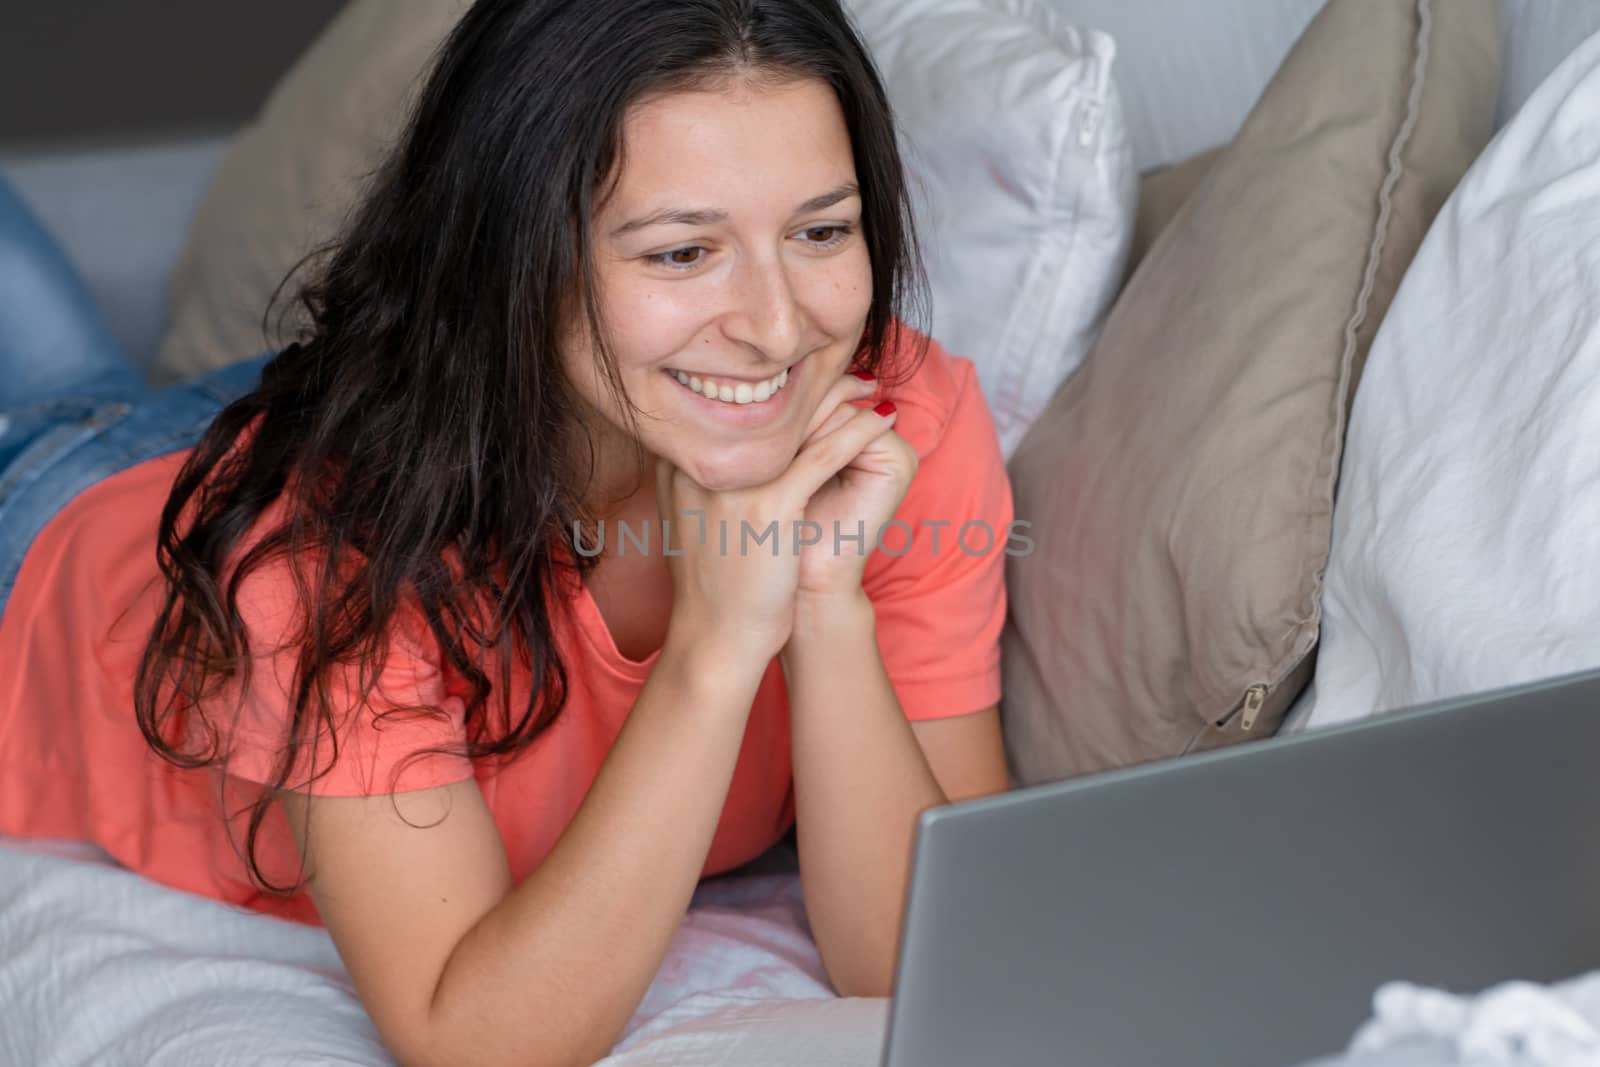 Girl lying on the couch rejoices looking at the laptop. Smiles, good mood, emotion of joy.